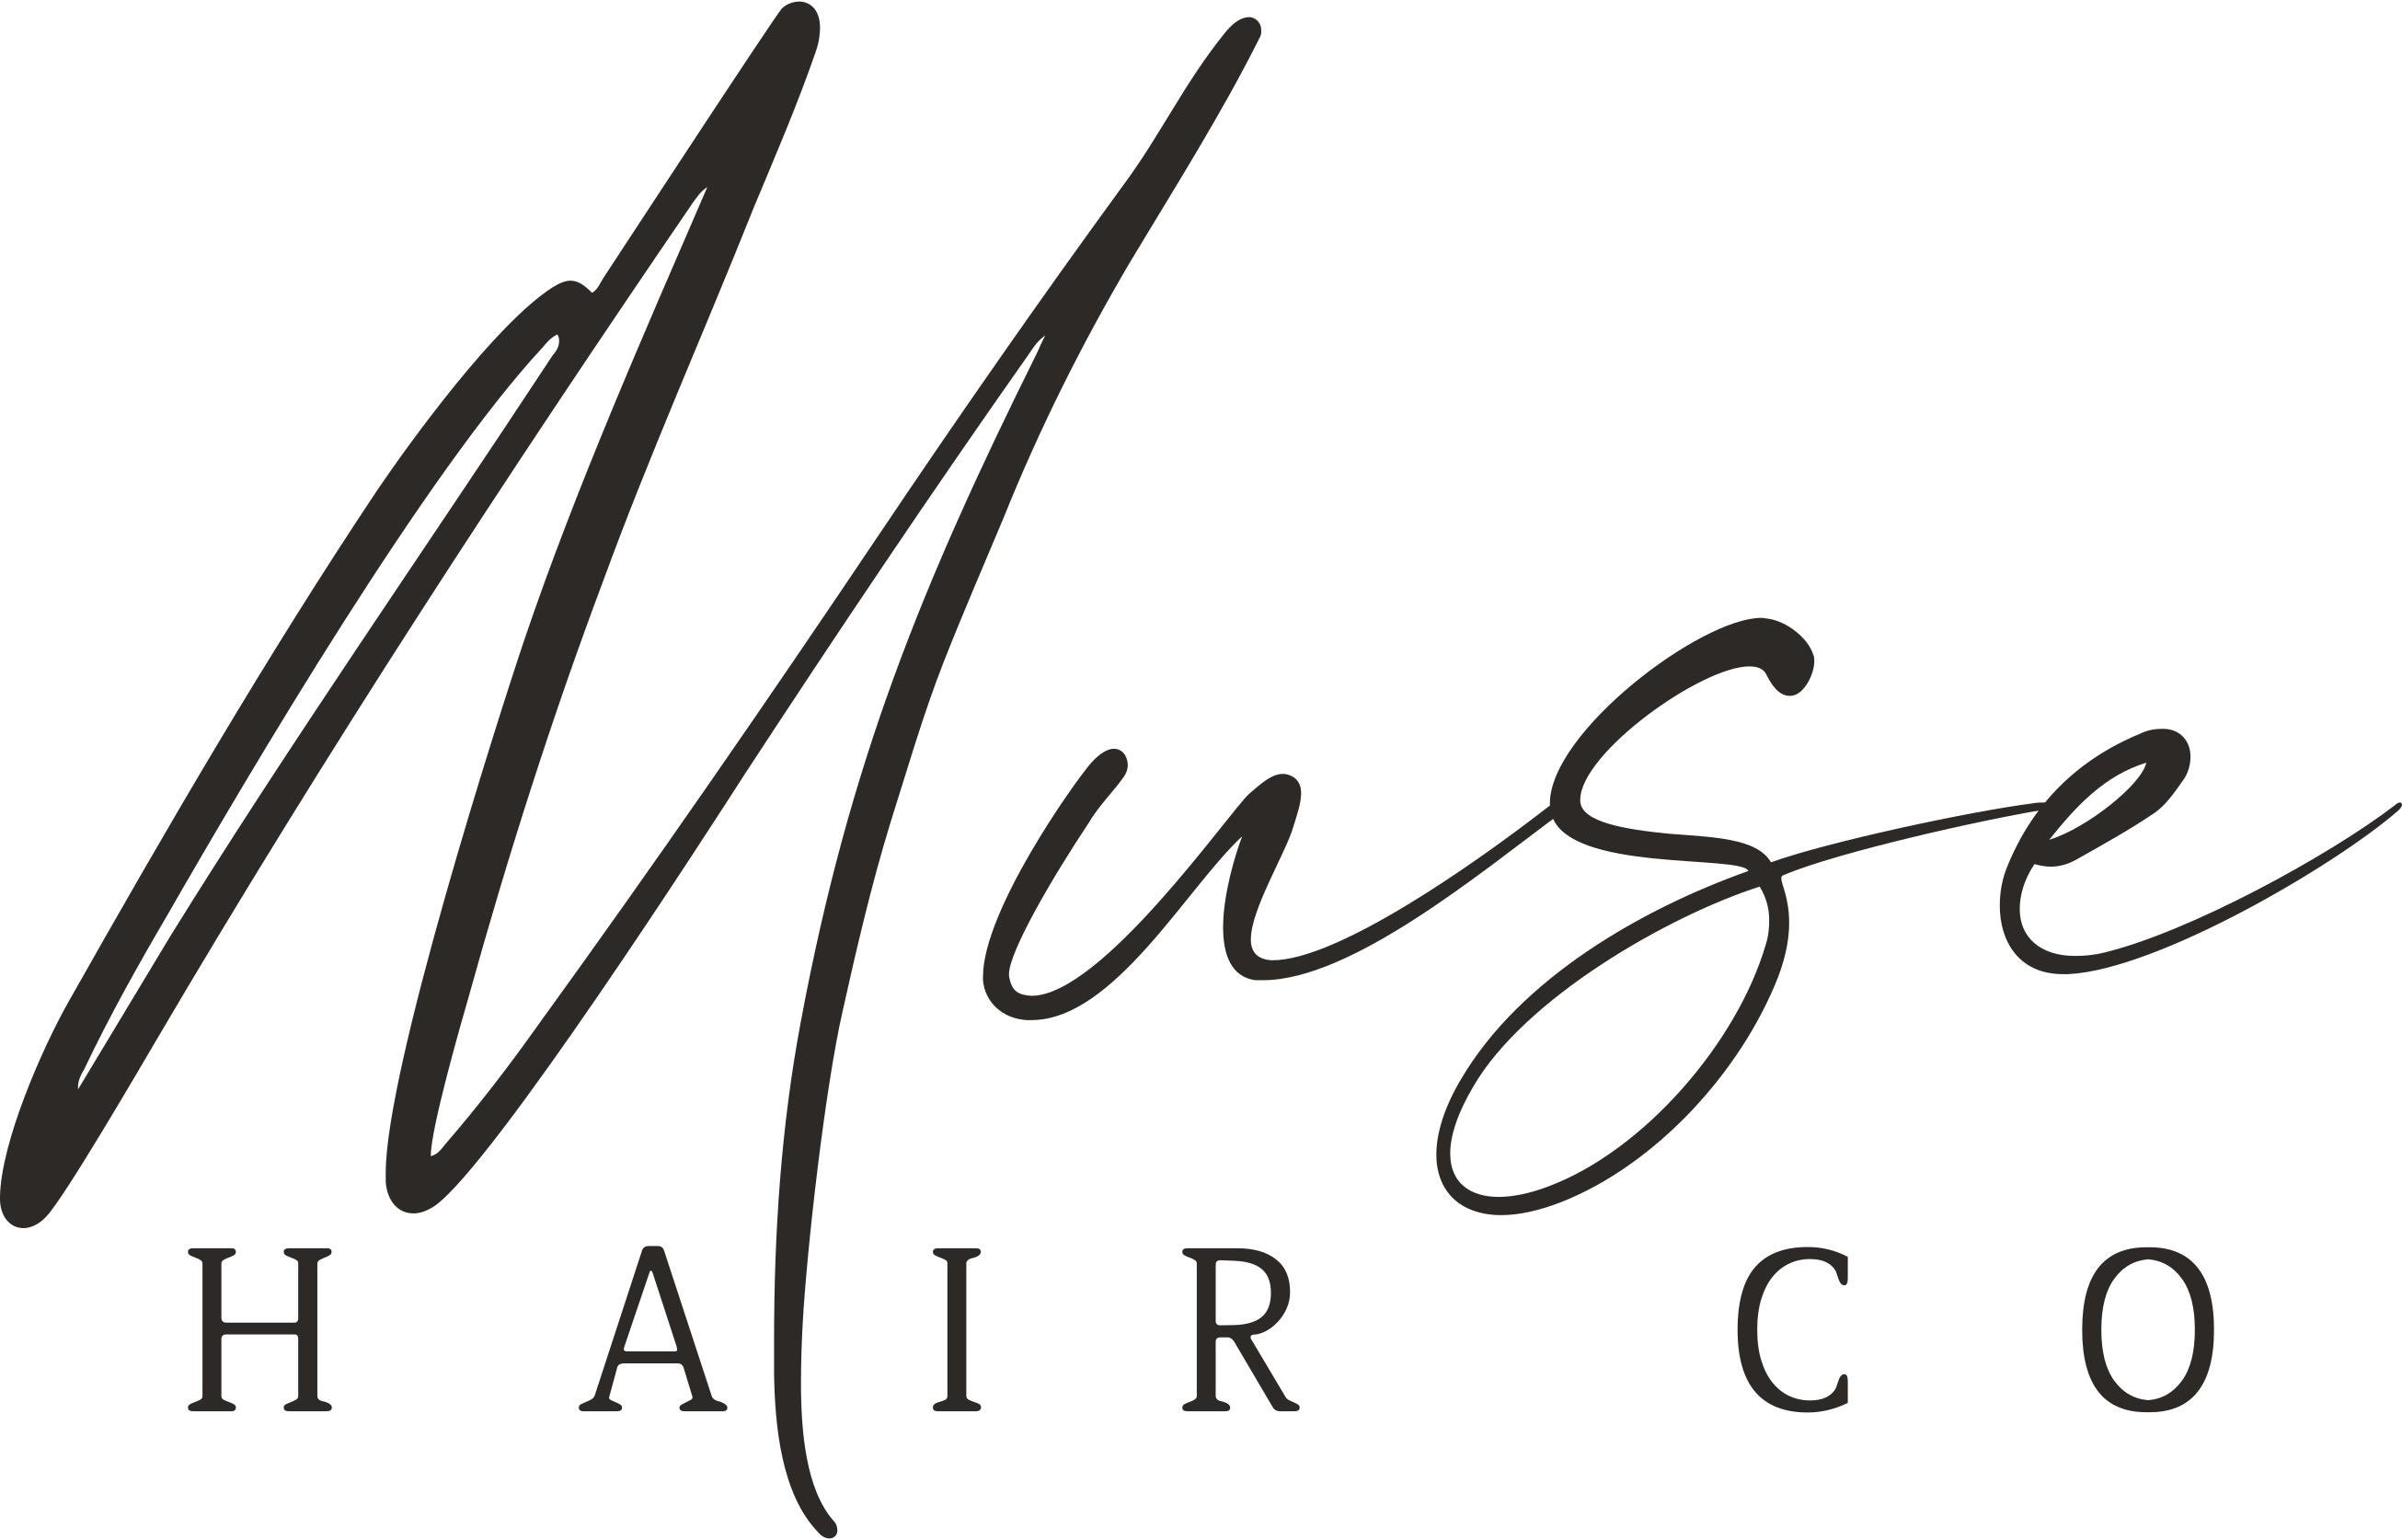 Muse Hair Co